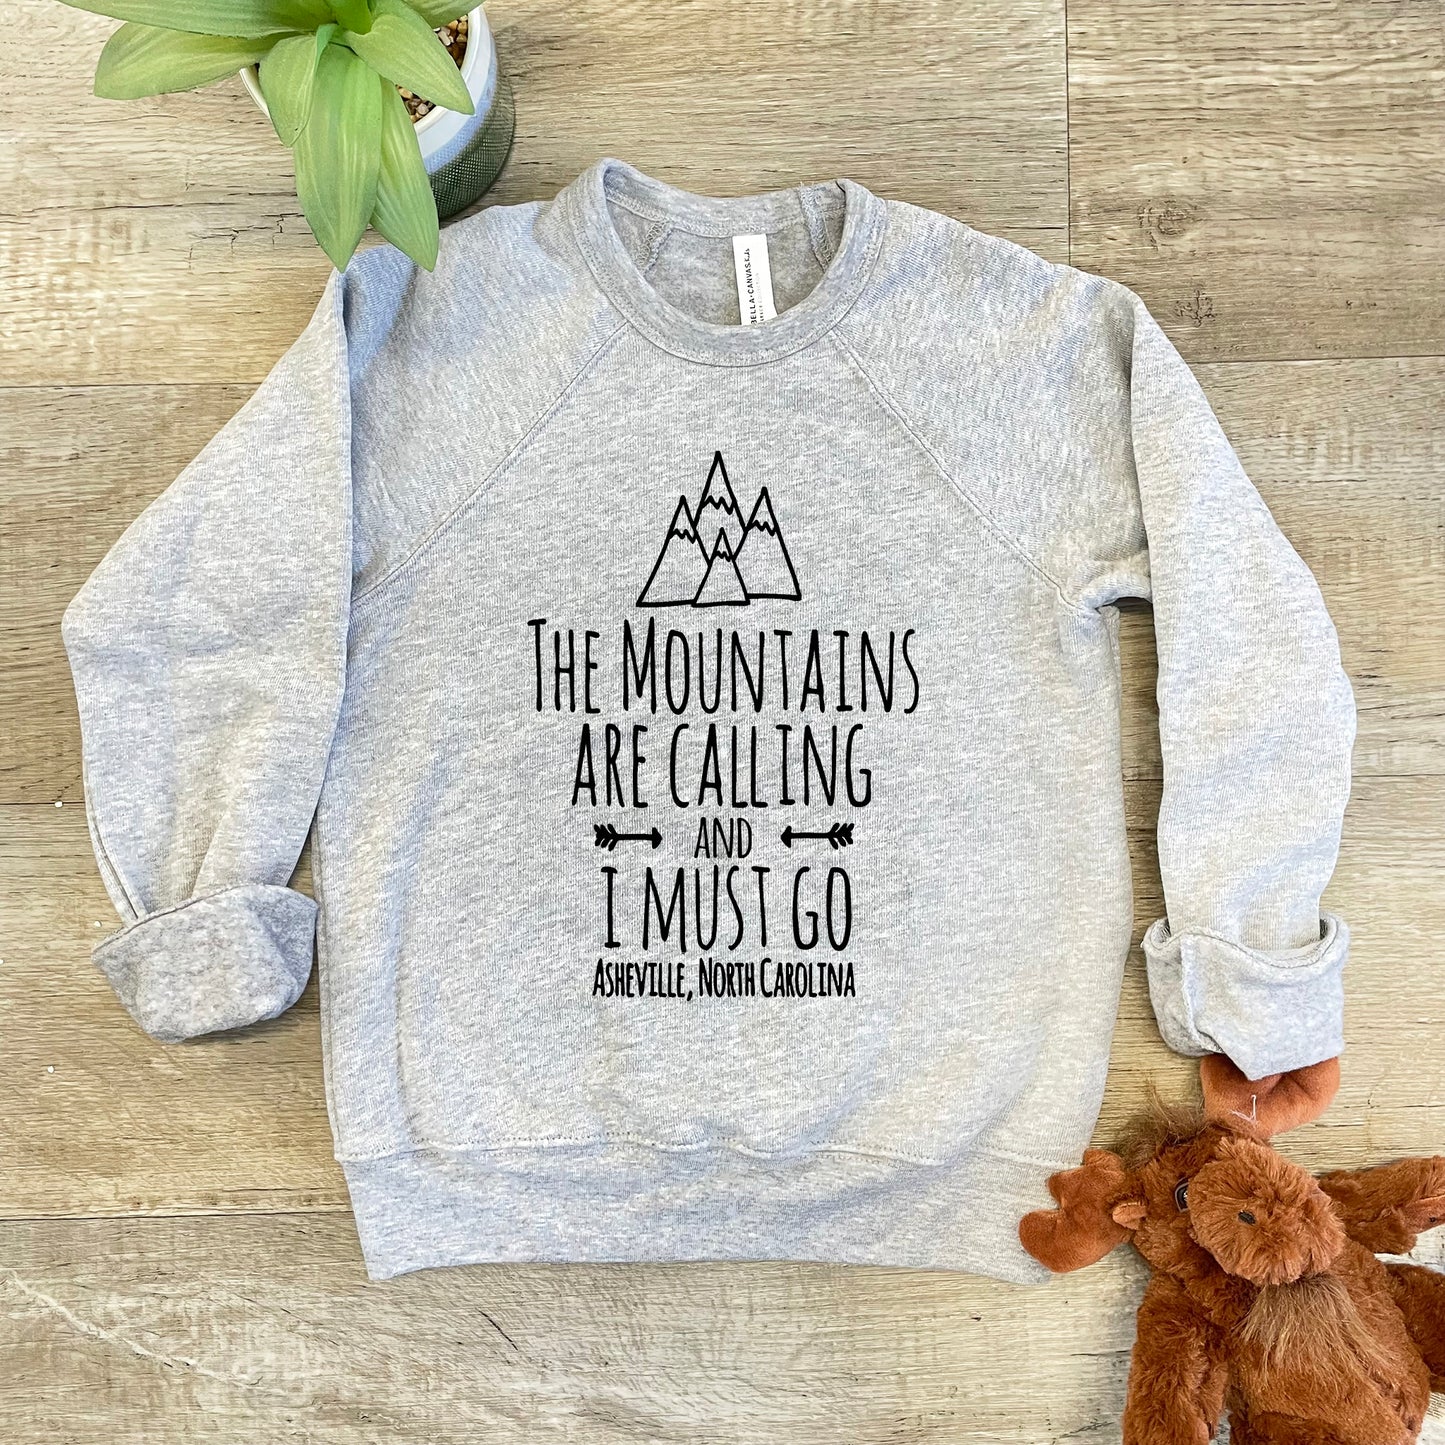 The Mountains Are Calling And I Must Go, Asheville North Carolina - Kid's Sweatshirt - Heather Gray or Mauve